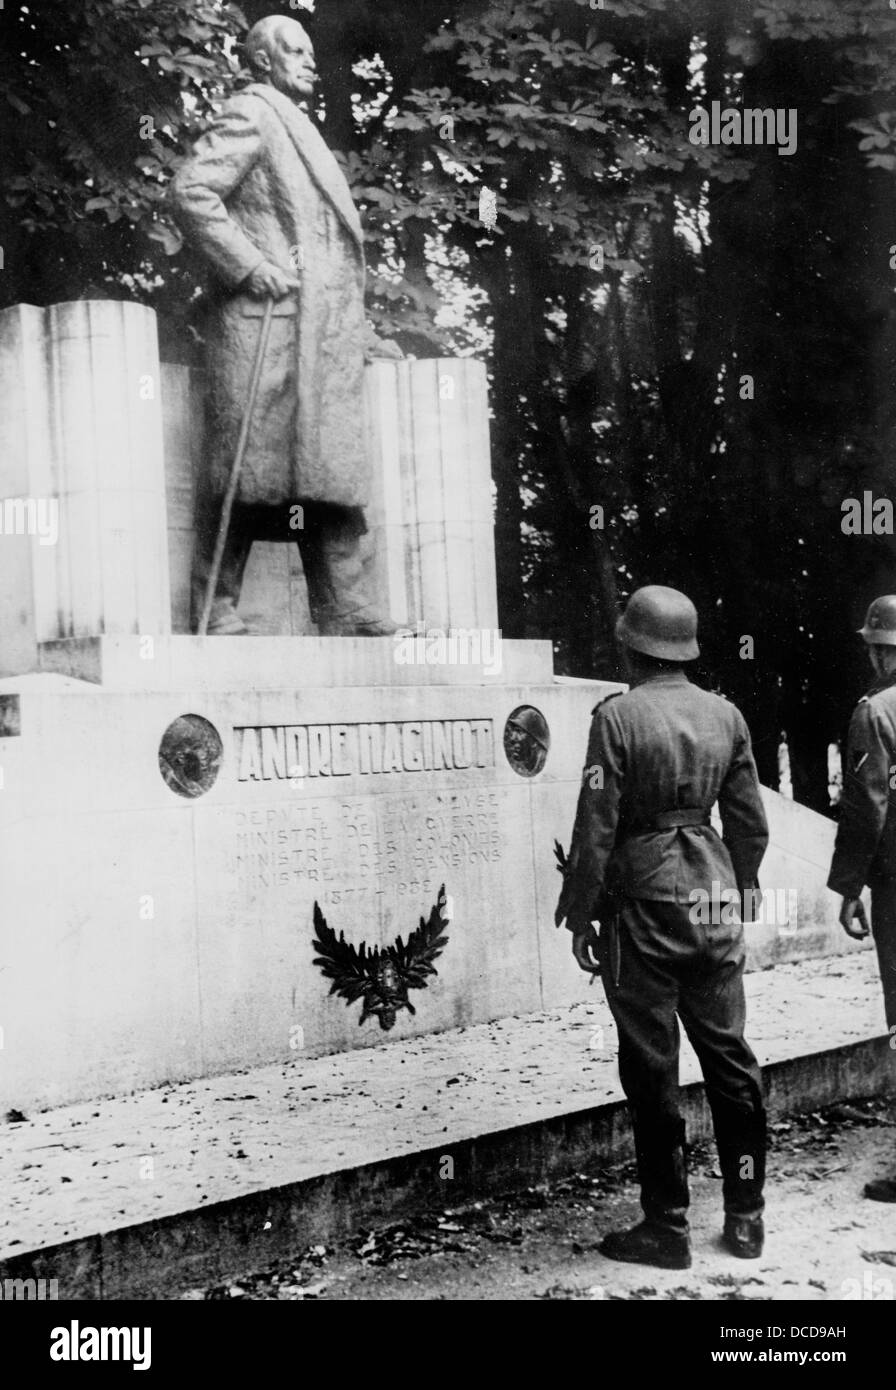 Members of the German Wehrmacht are pictured in front of the memorial for the French Minister of War André Maginot after who the French fortifications on the German-French border - the so-called Maginot Line - were named in Revigny-sur-Ornain, France, in June 1940. Fotoarchiv für Zeitgeschichte Stock Photo